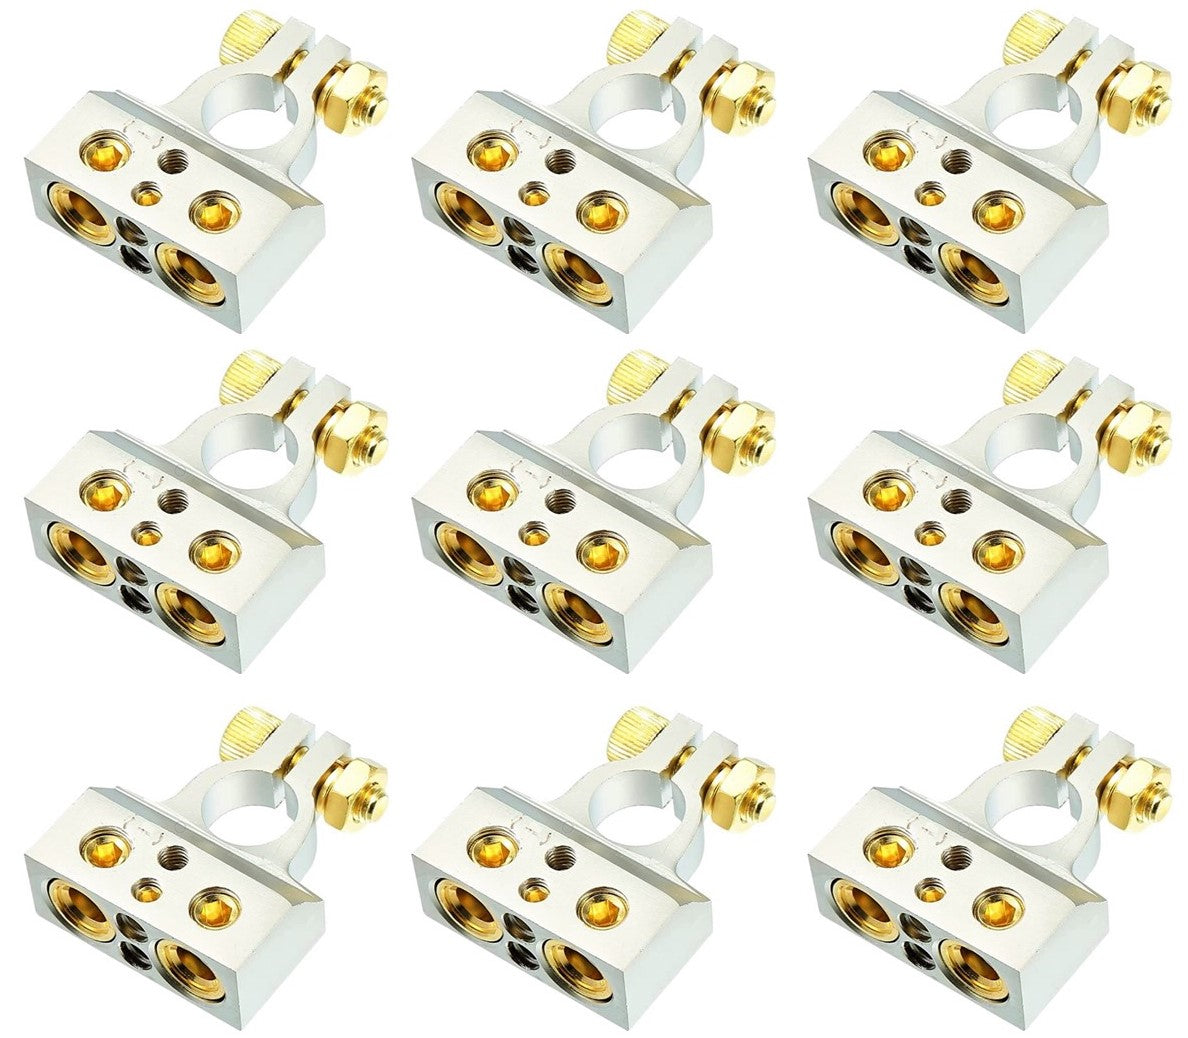 12 Absolute BTC300N 0/2/4/6/8 AWG Single Negative Power Battery Terminal Connectors Chrome